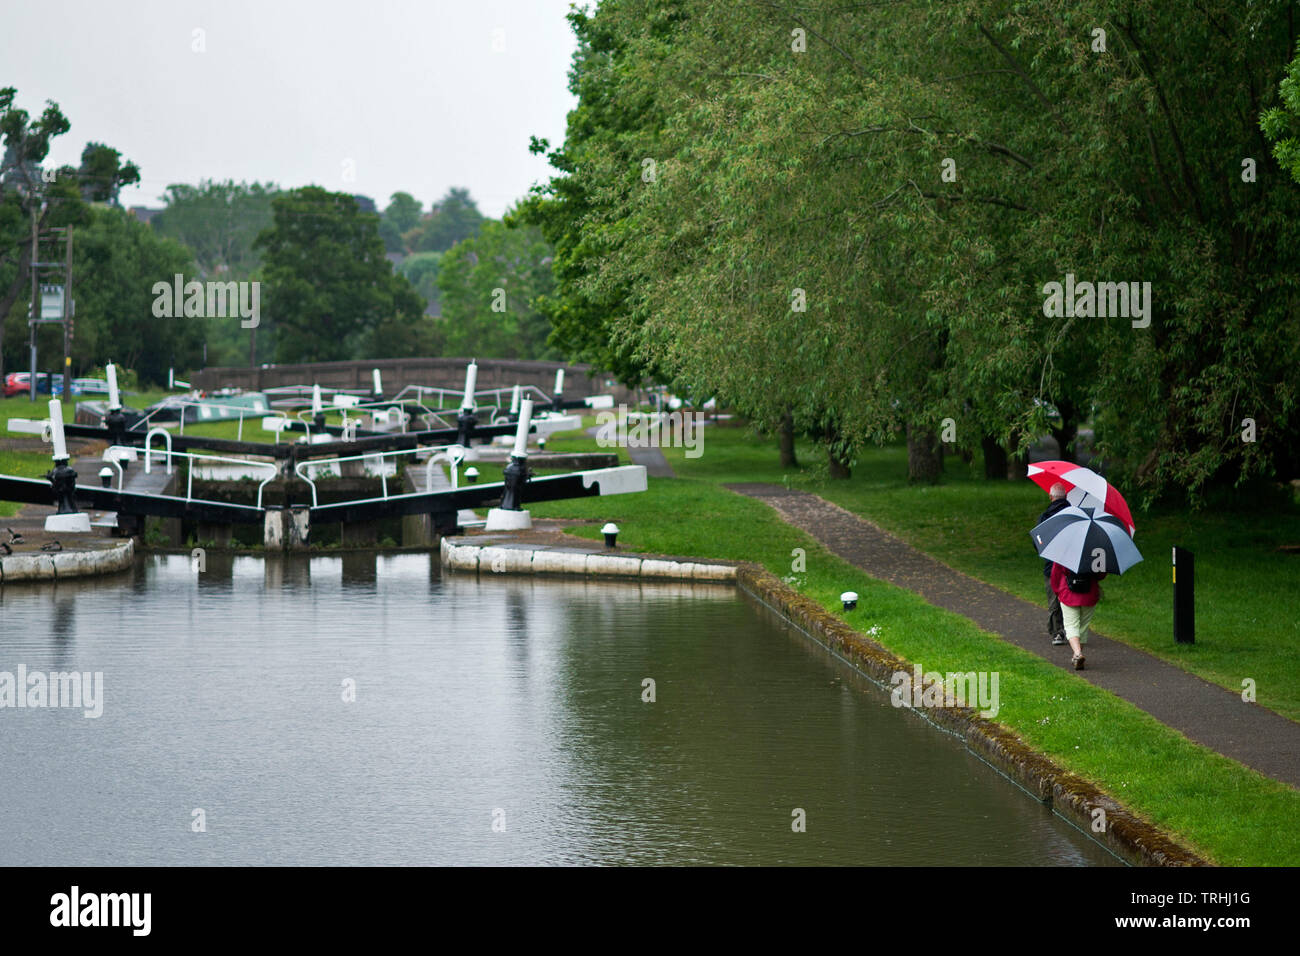 People shelter from the rain during a downpour as they walk along the tow path past Hatton Locks on the Grand Union Canal. June 4 2019. Stock Photo